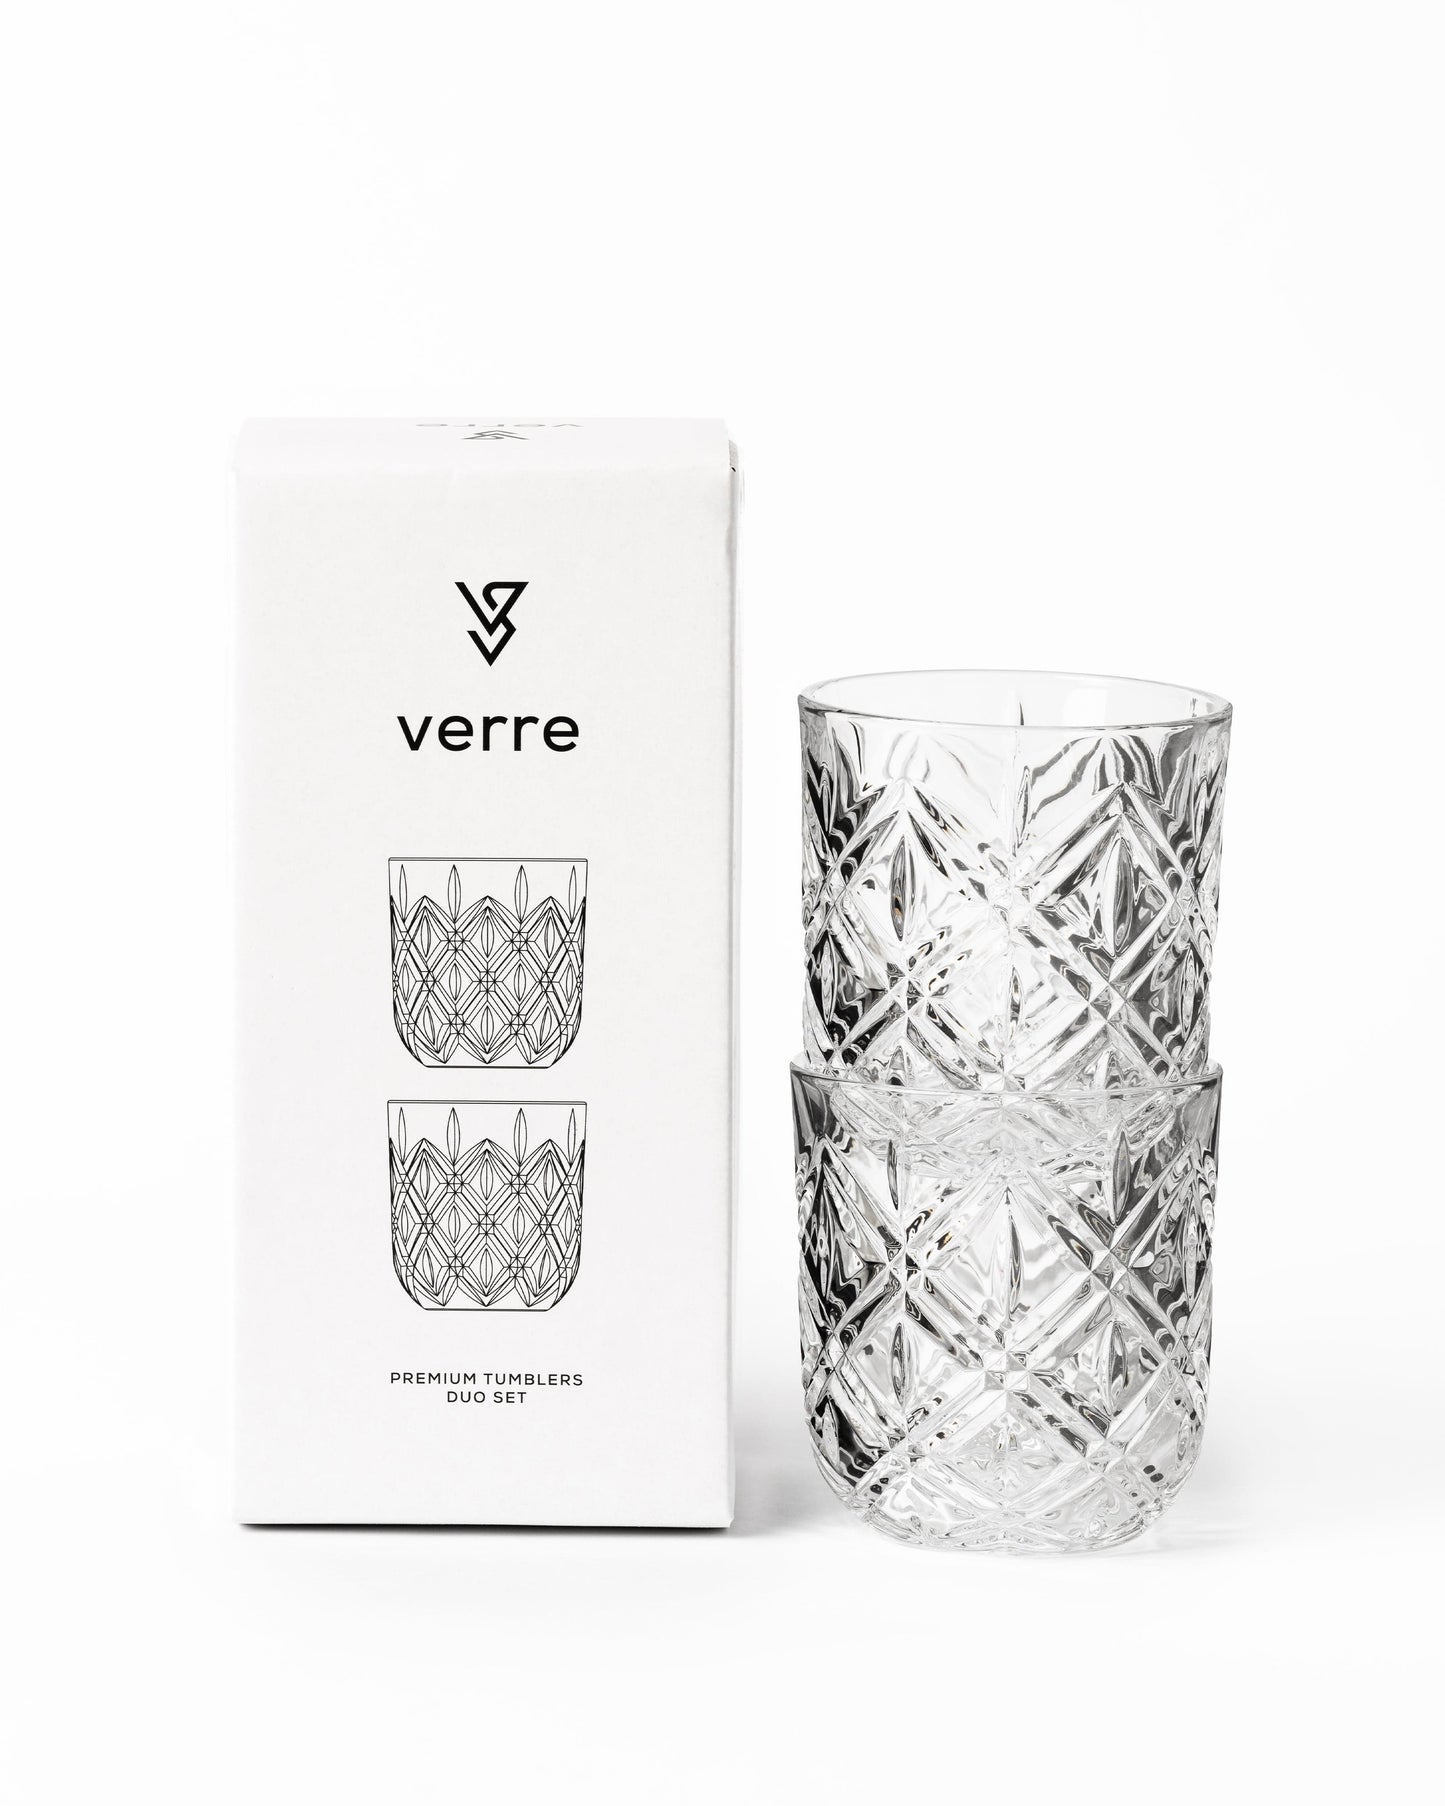 VERRE European Etched Glass, Tumbler Set - 2pc in Gift Box